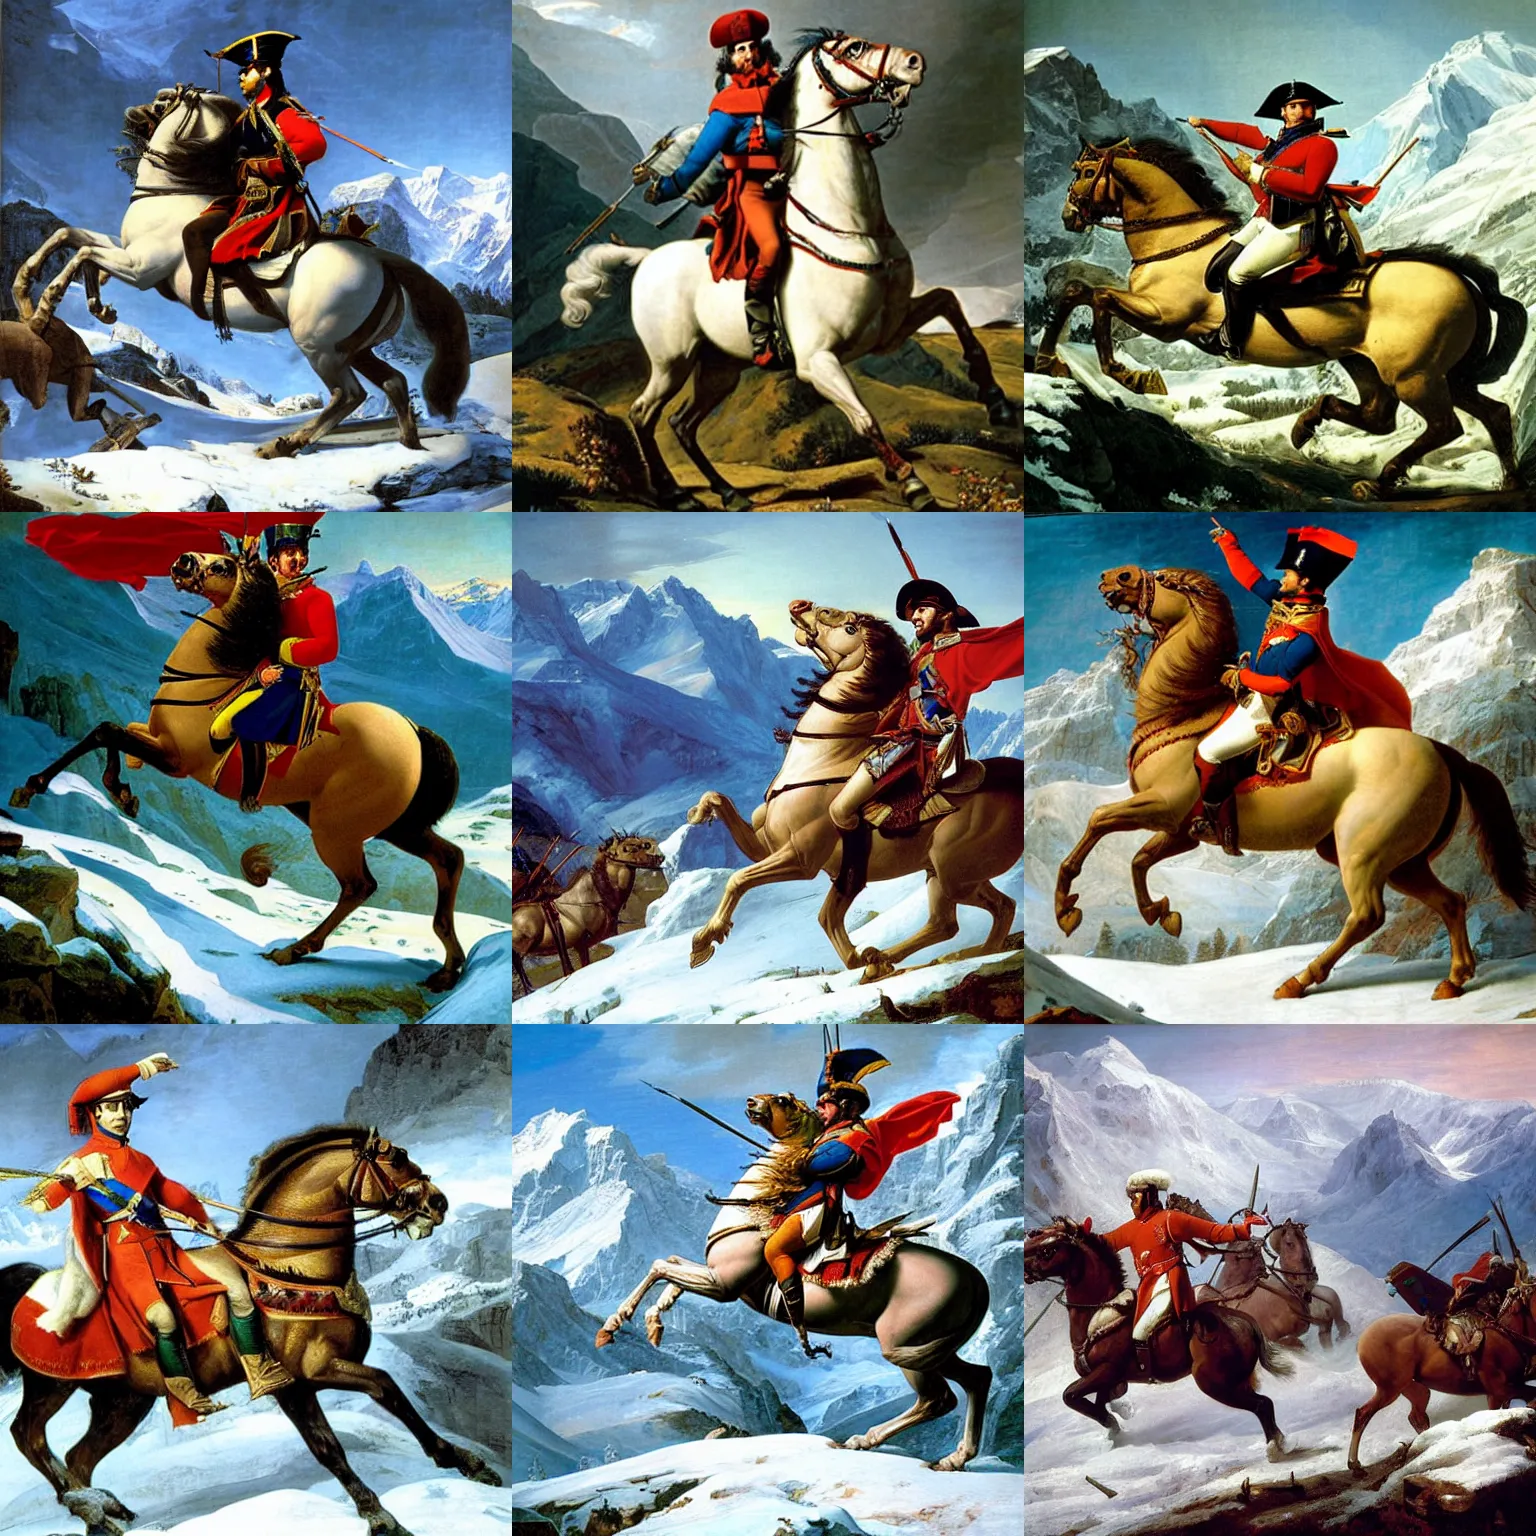 Prompt: napoleon crossing the alps painting by jacques louis david, napoleon is mounted on a machine from horizon zero dawn instead of horse